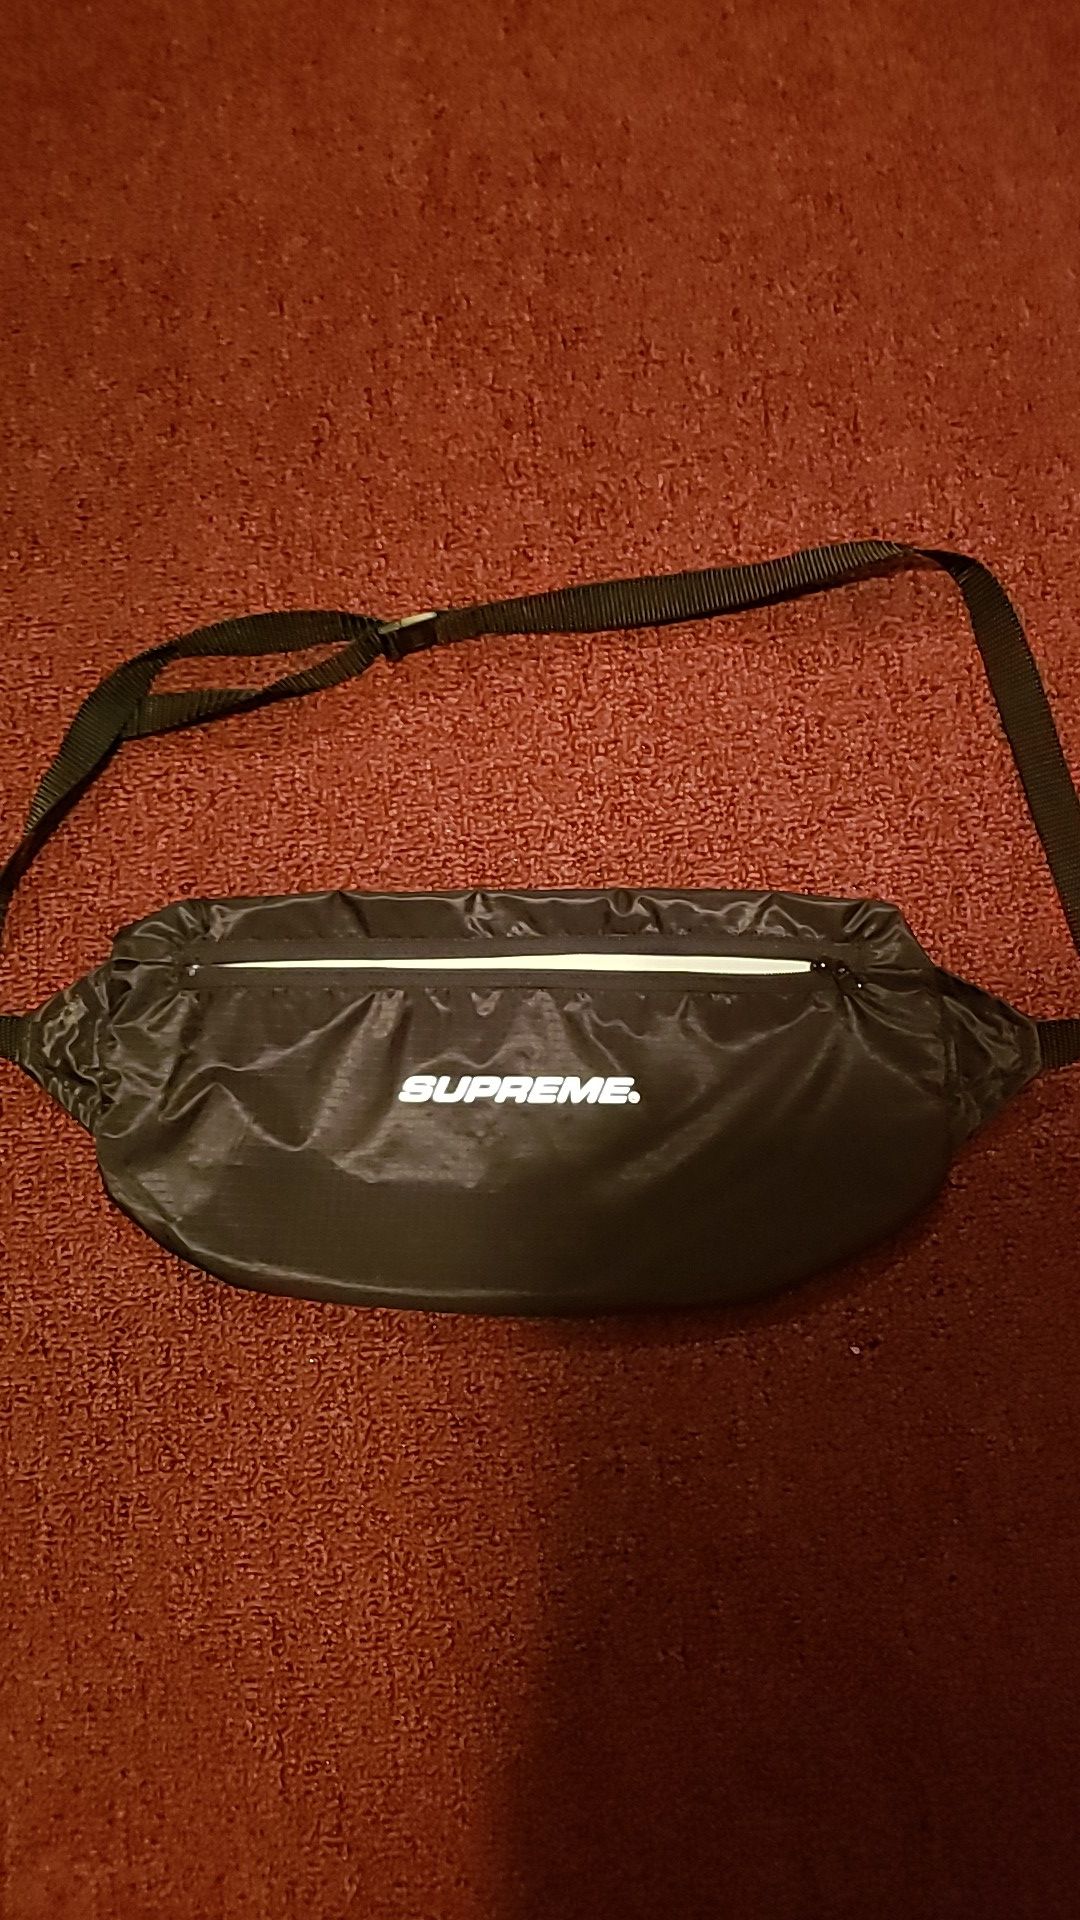 (LEGIT) FW18 Supreme Fanny Pack [Item Came with FW18 Reflective Rain Jacket]